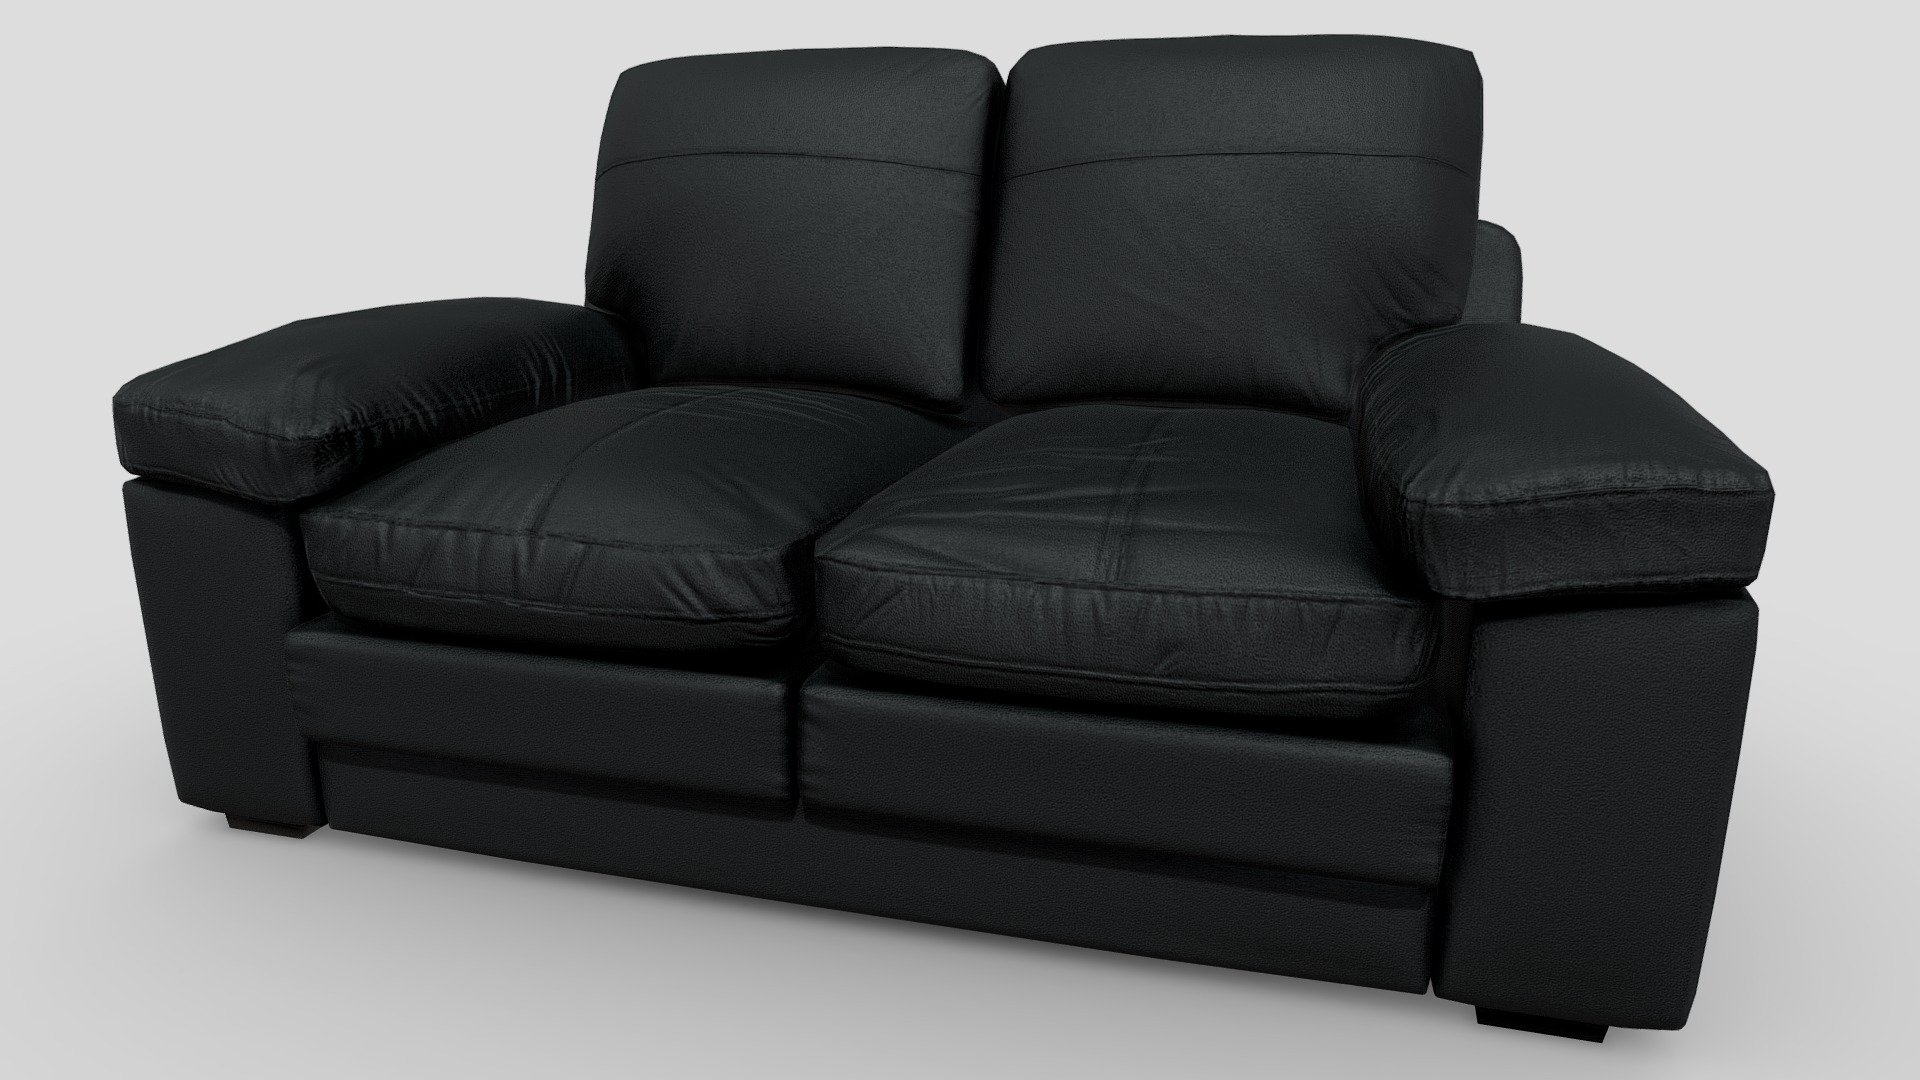 Black leather sofa designed in Maya, detailed in ZBrush and textured in Substance painter.

Model have 4k baked maps, ready for Unity3d and Unreal Game engine 3d model